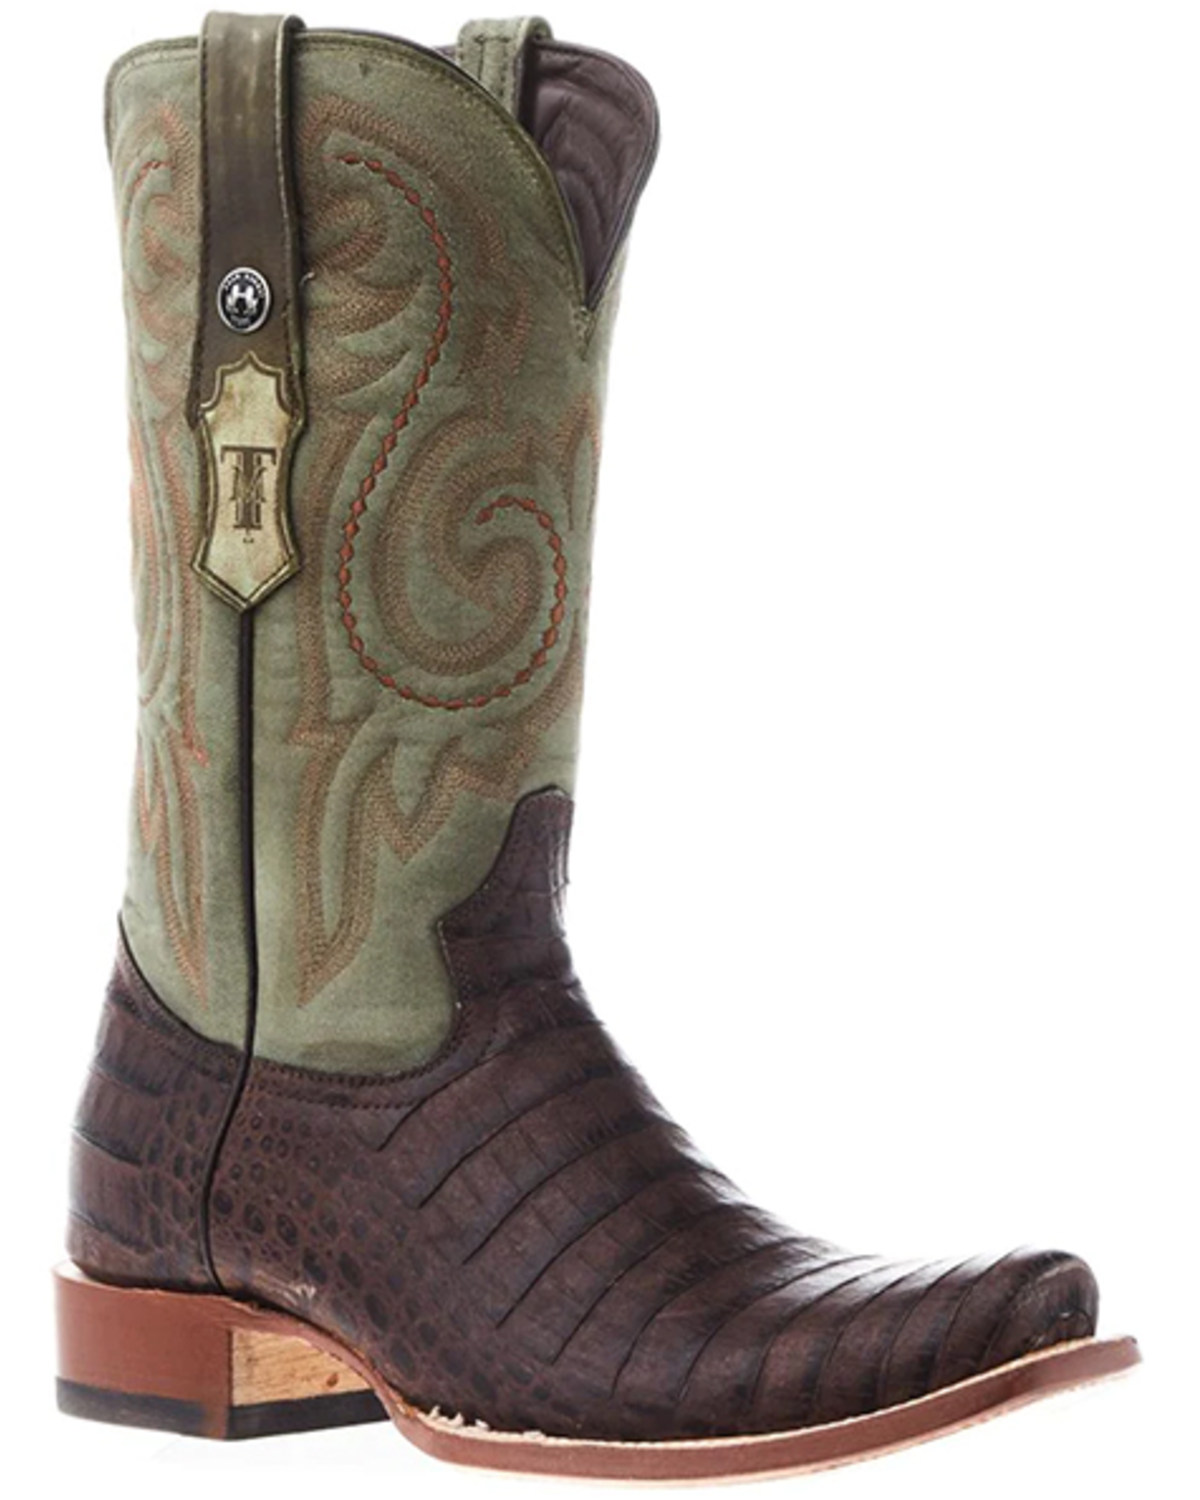 Tanner Mark Men's Caiman Belly Print Western Boots - Square Toe